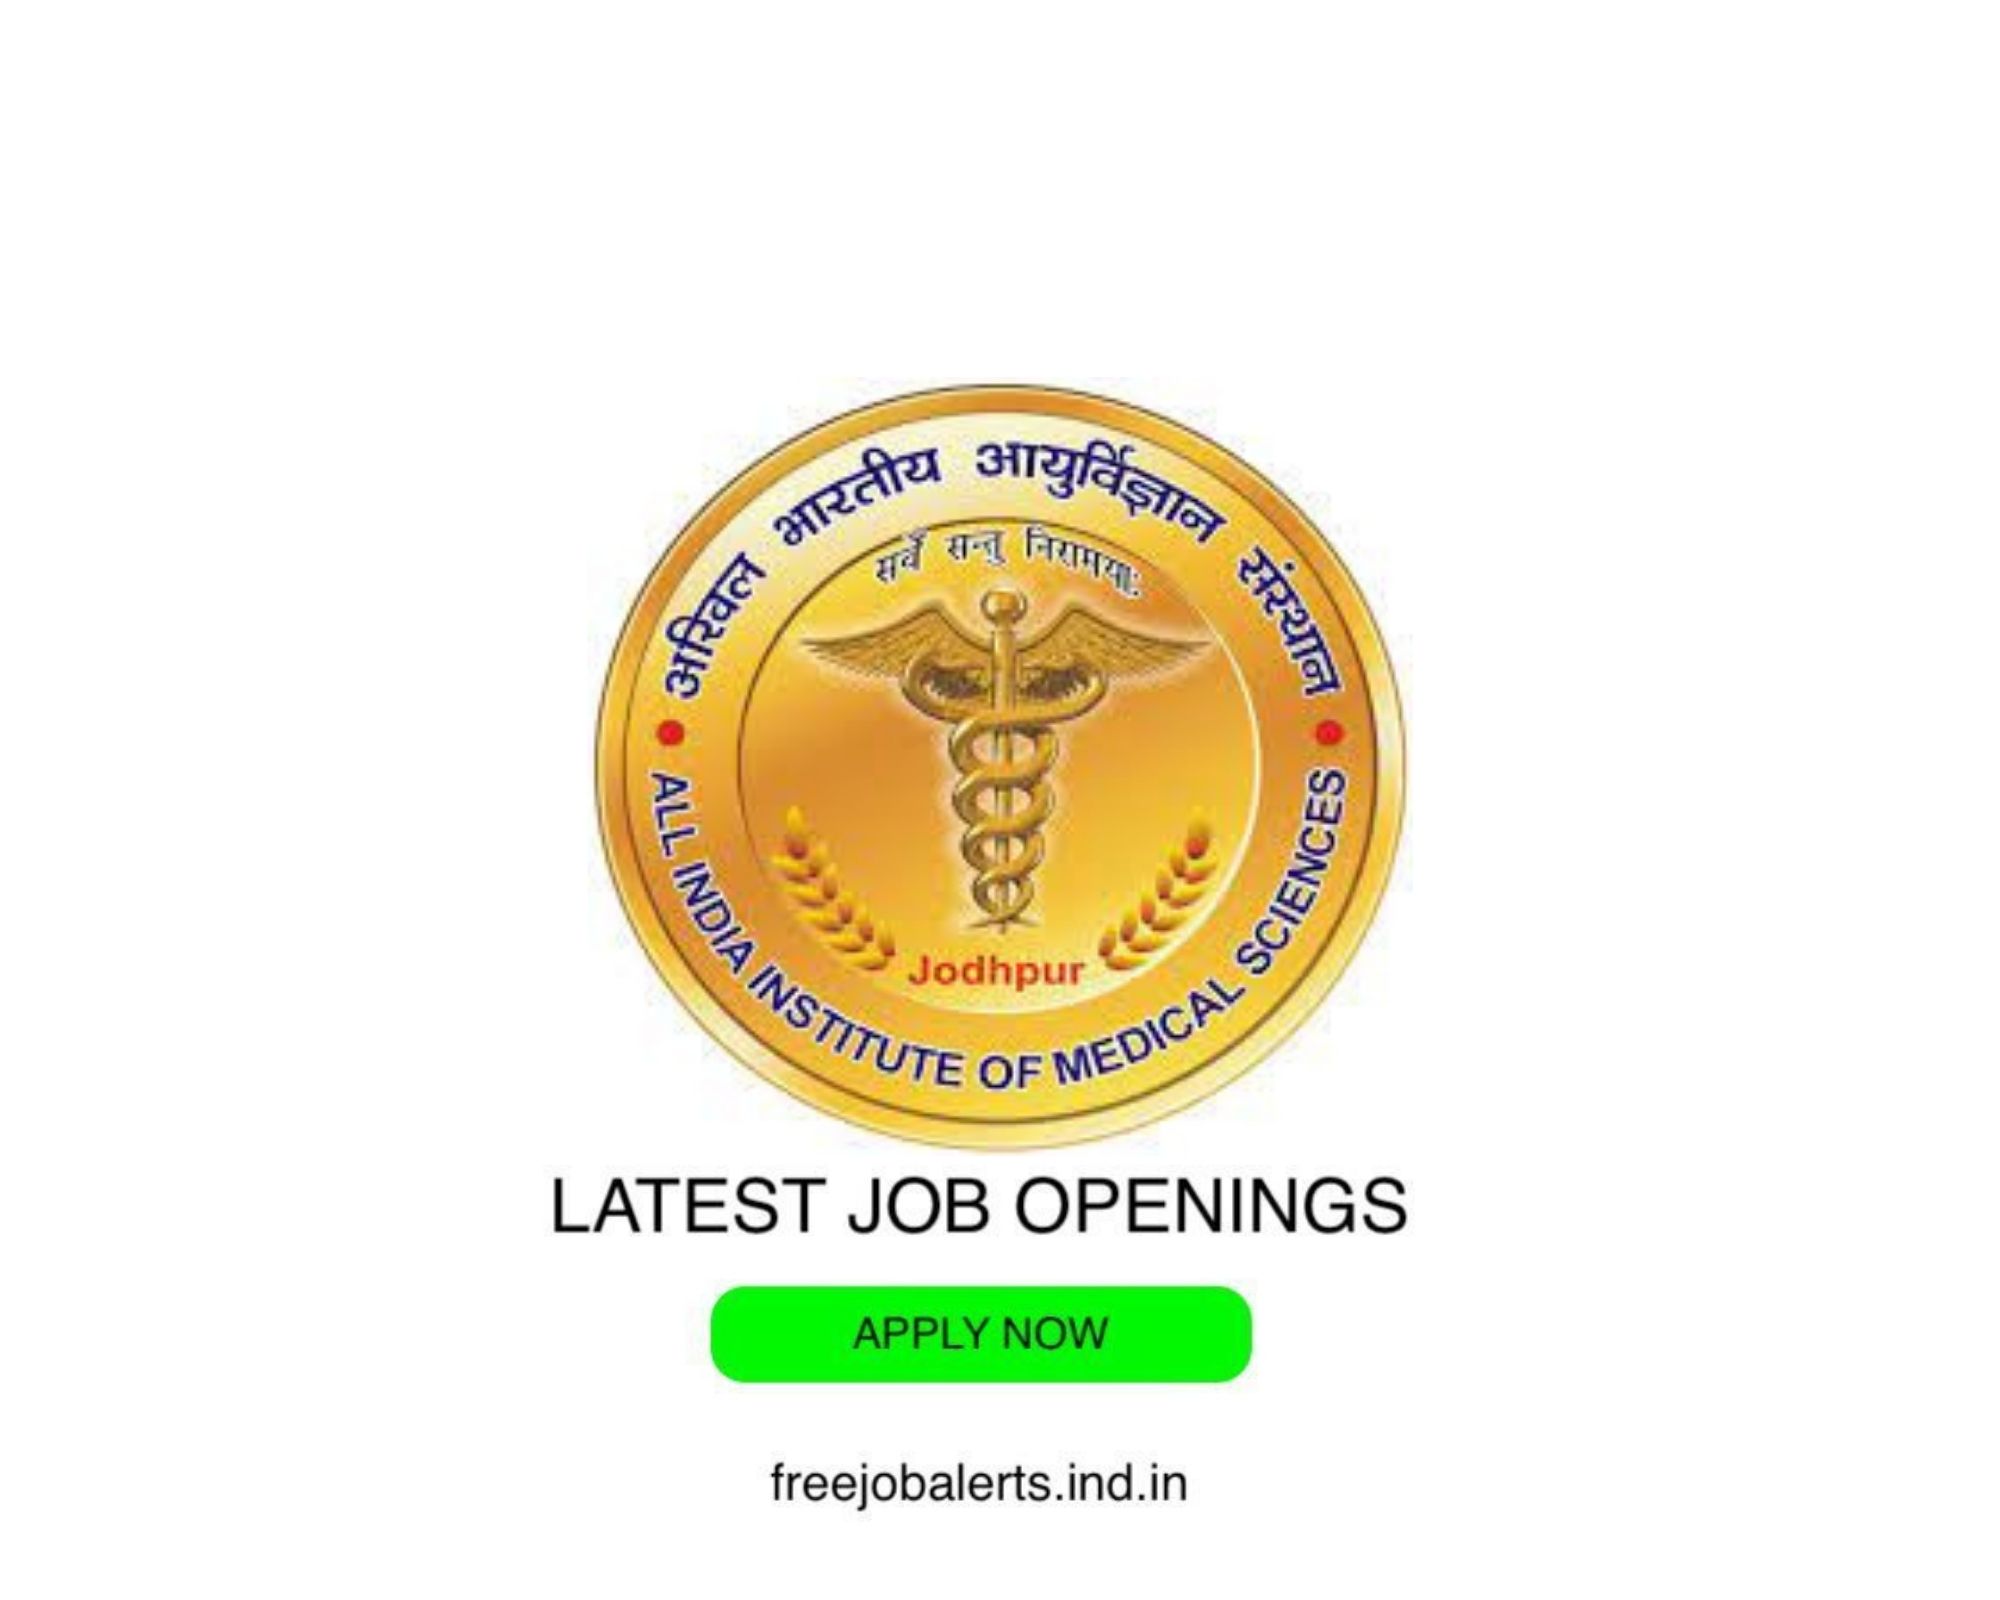 AIIMS- All India Institute of Medical Sciences- Latest Govt job openings - Free job alerts, Indian Govt Jobs